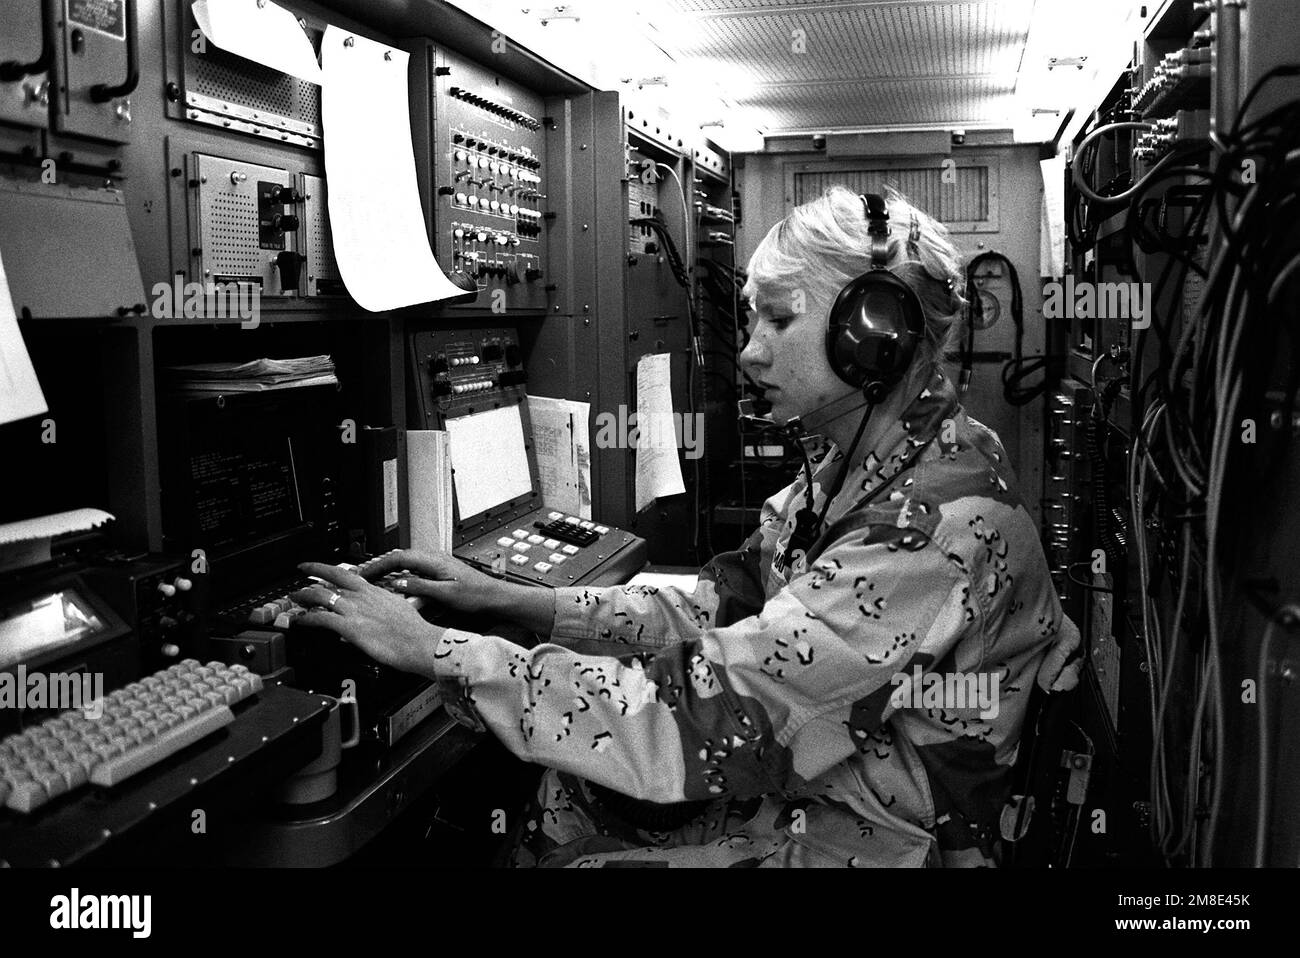 A soldier from the 11th Signal Brigade works in a telecommunications van during Operation Desert Shield. Subject Operation/Series: DESERT SHIELD Base: Riyadh Country: Saudi Arabia (SAU) Stock Photo